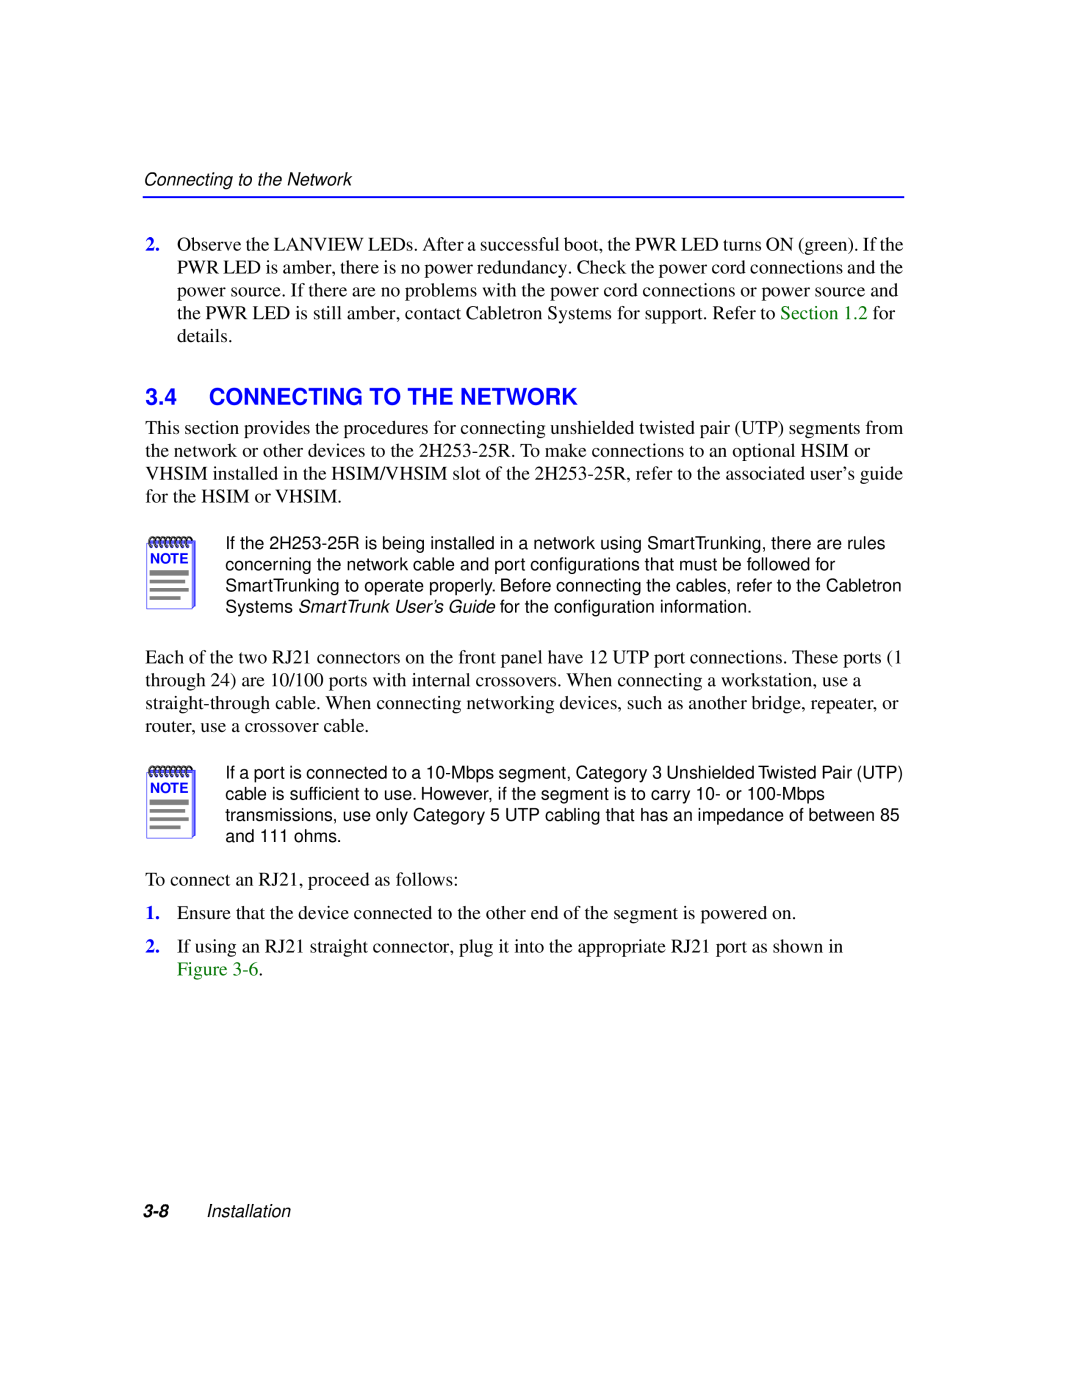 Cabletron Systems 2H253-25R manual Connecting To The Network 